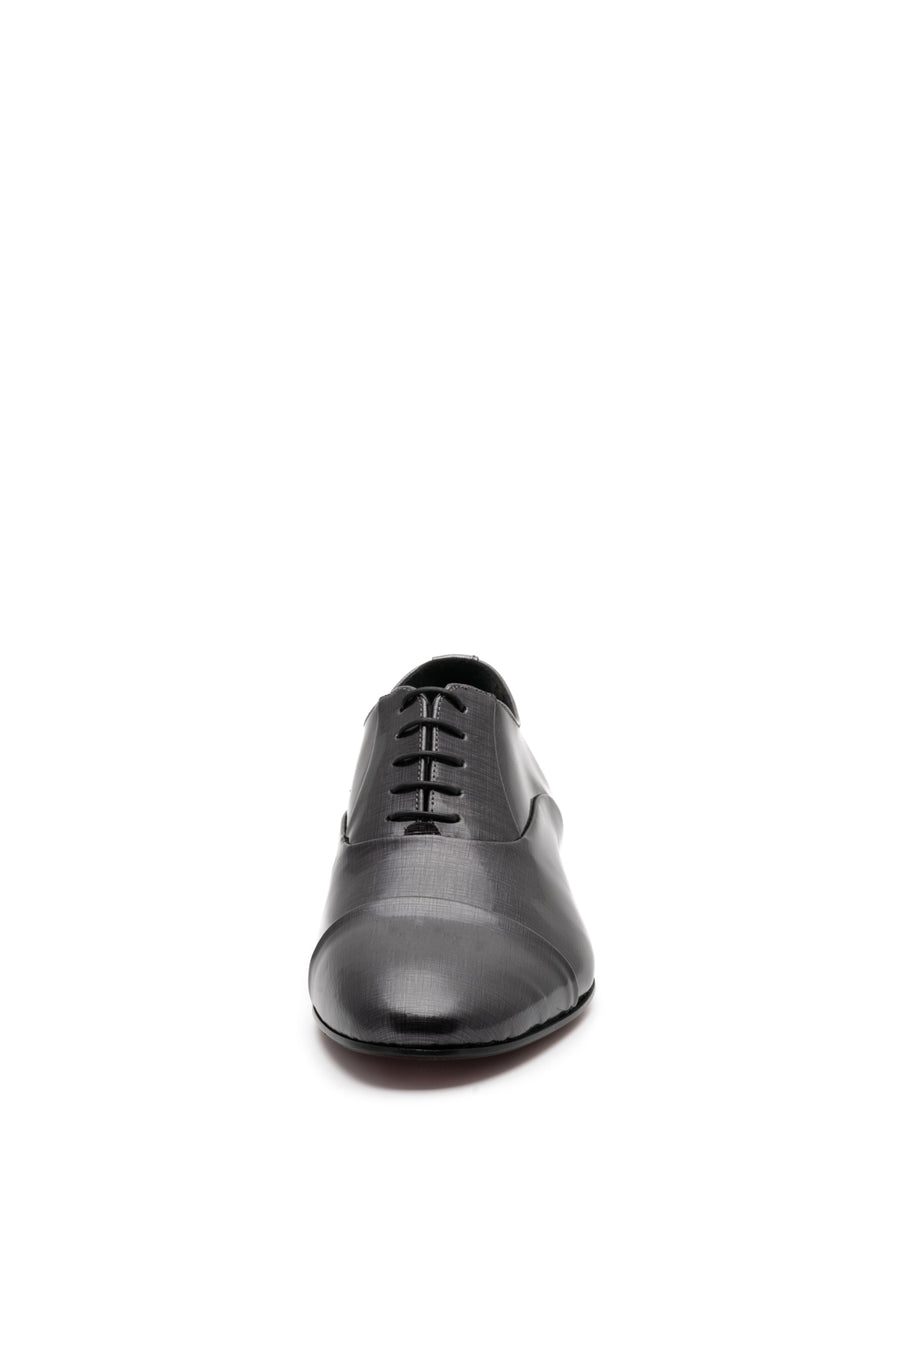 ELIANO patent Lace Up Shoes